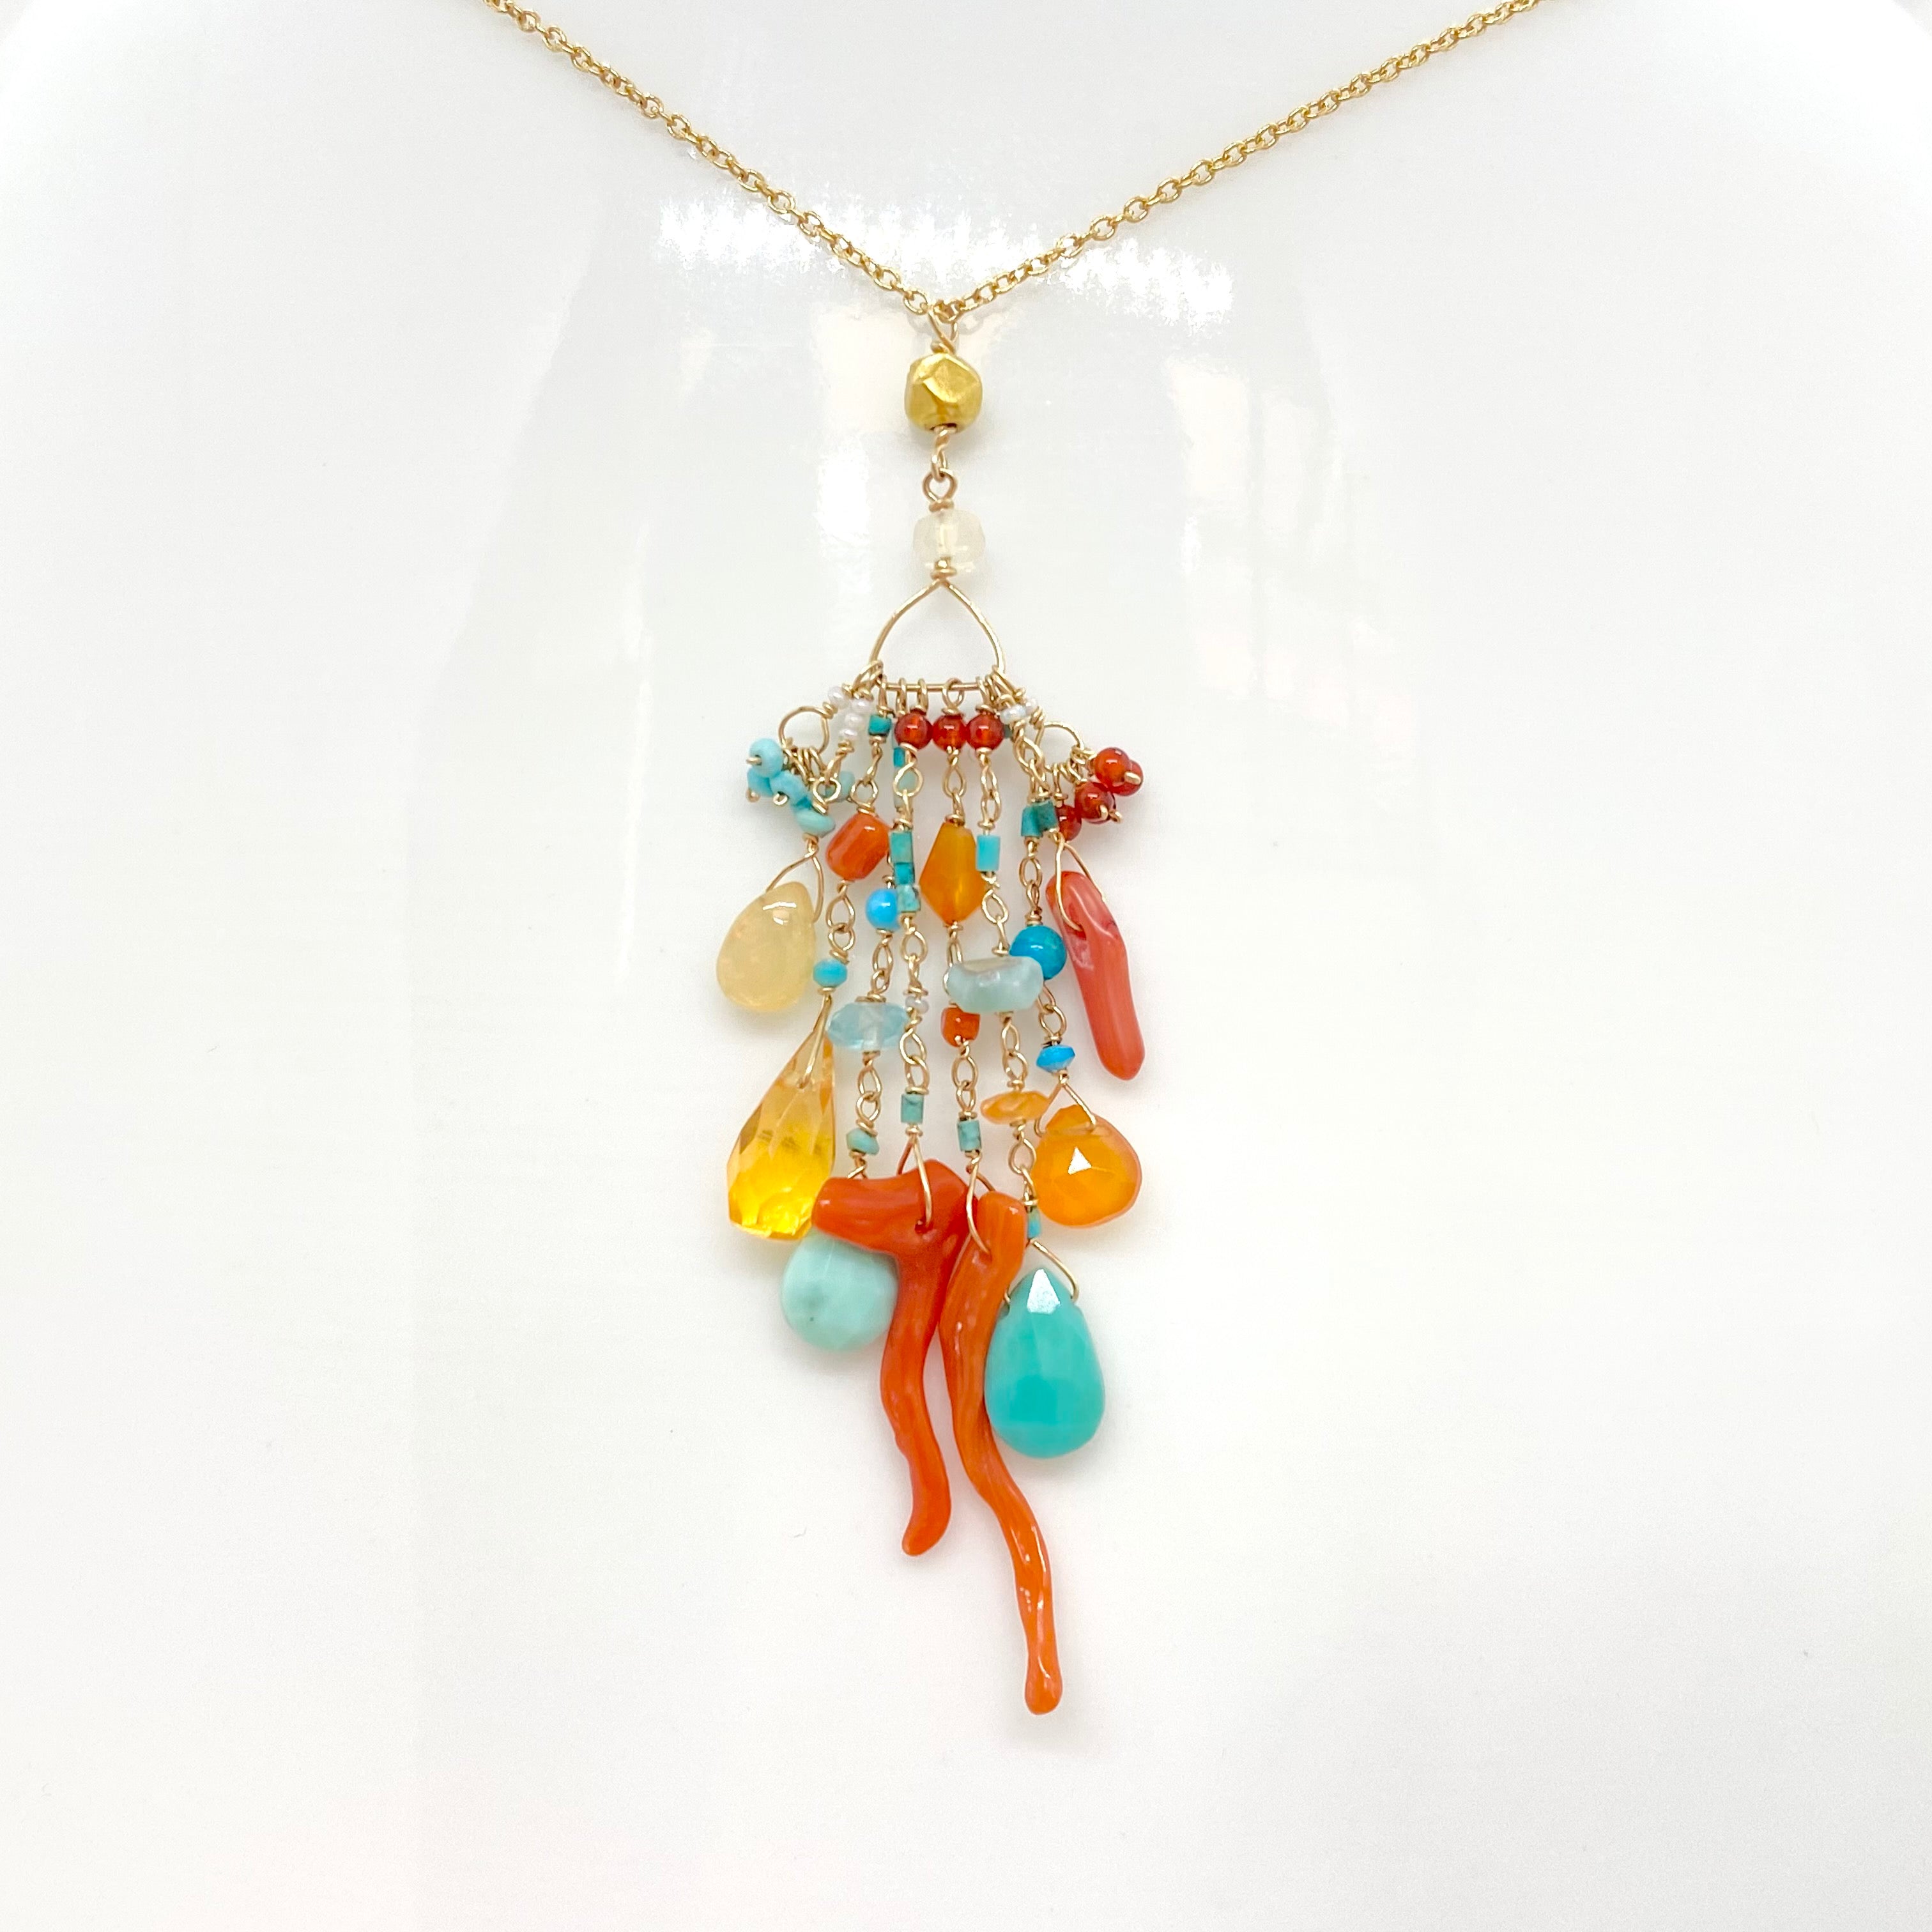 14k Gold Chain Necklace w/ Coral, 18k Gold Nugget, Turquoise, Opal, Apatite & Carnelian